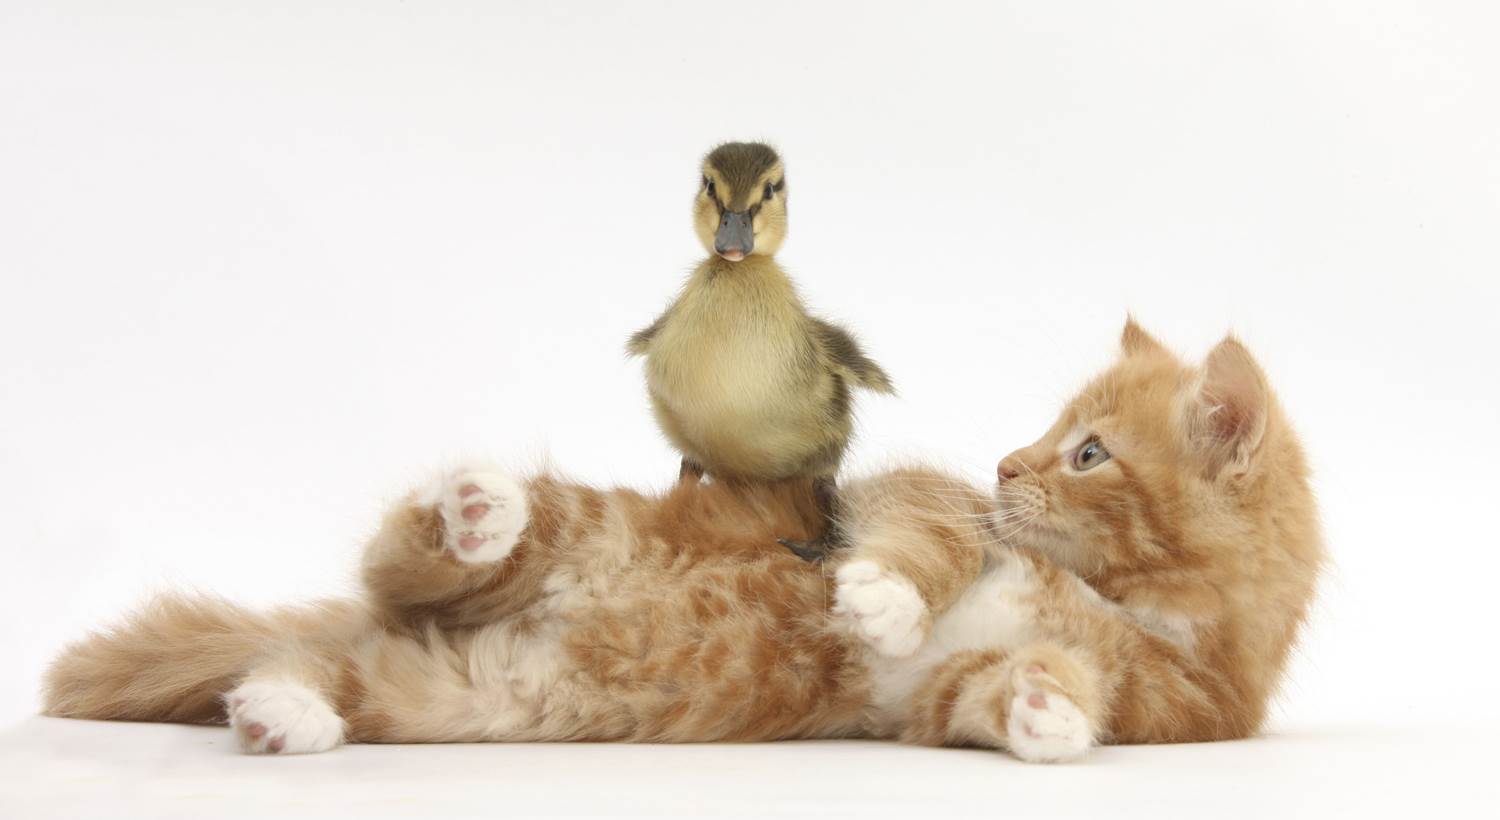 What-the-quack-ss-111122-animal-